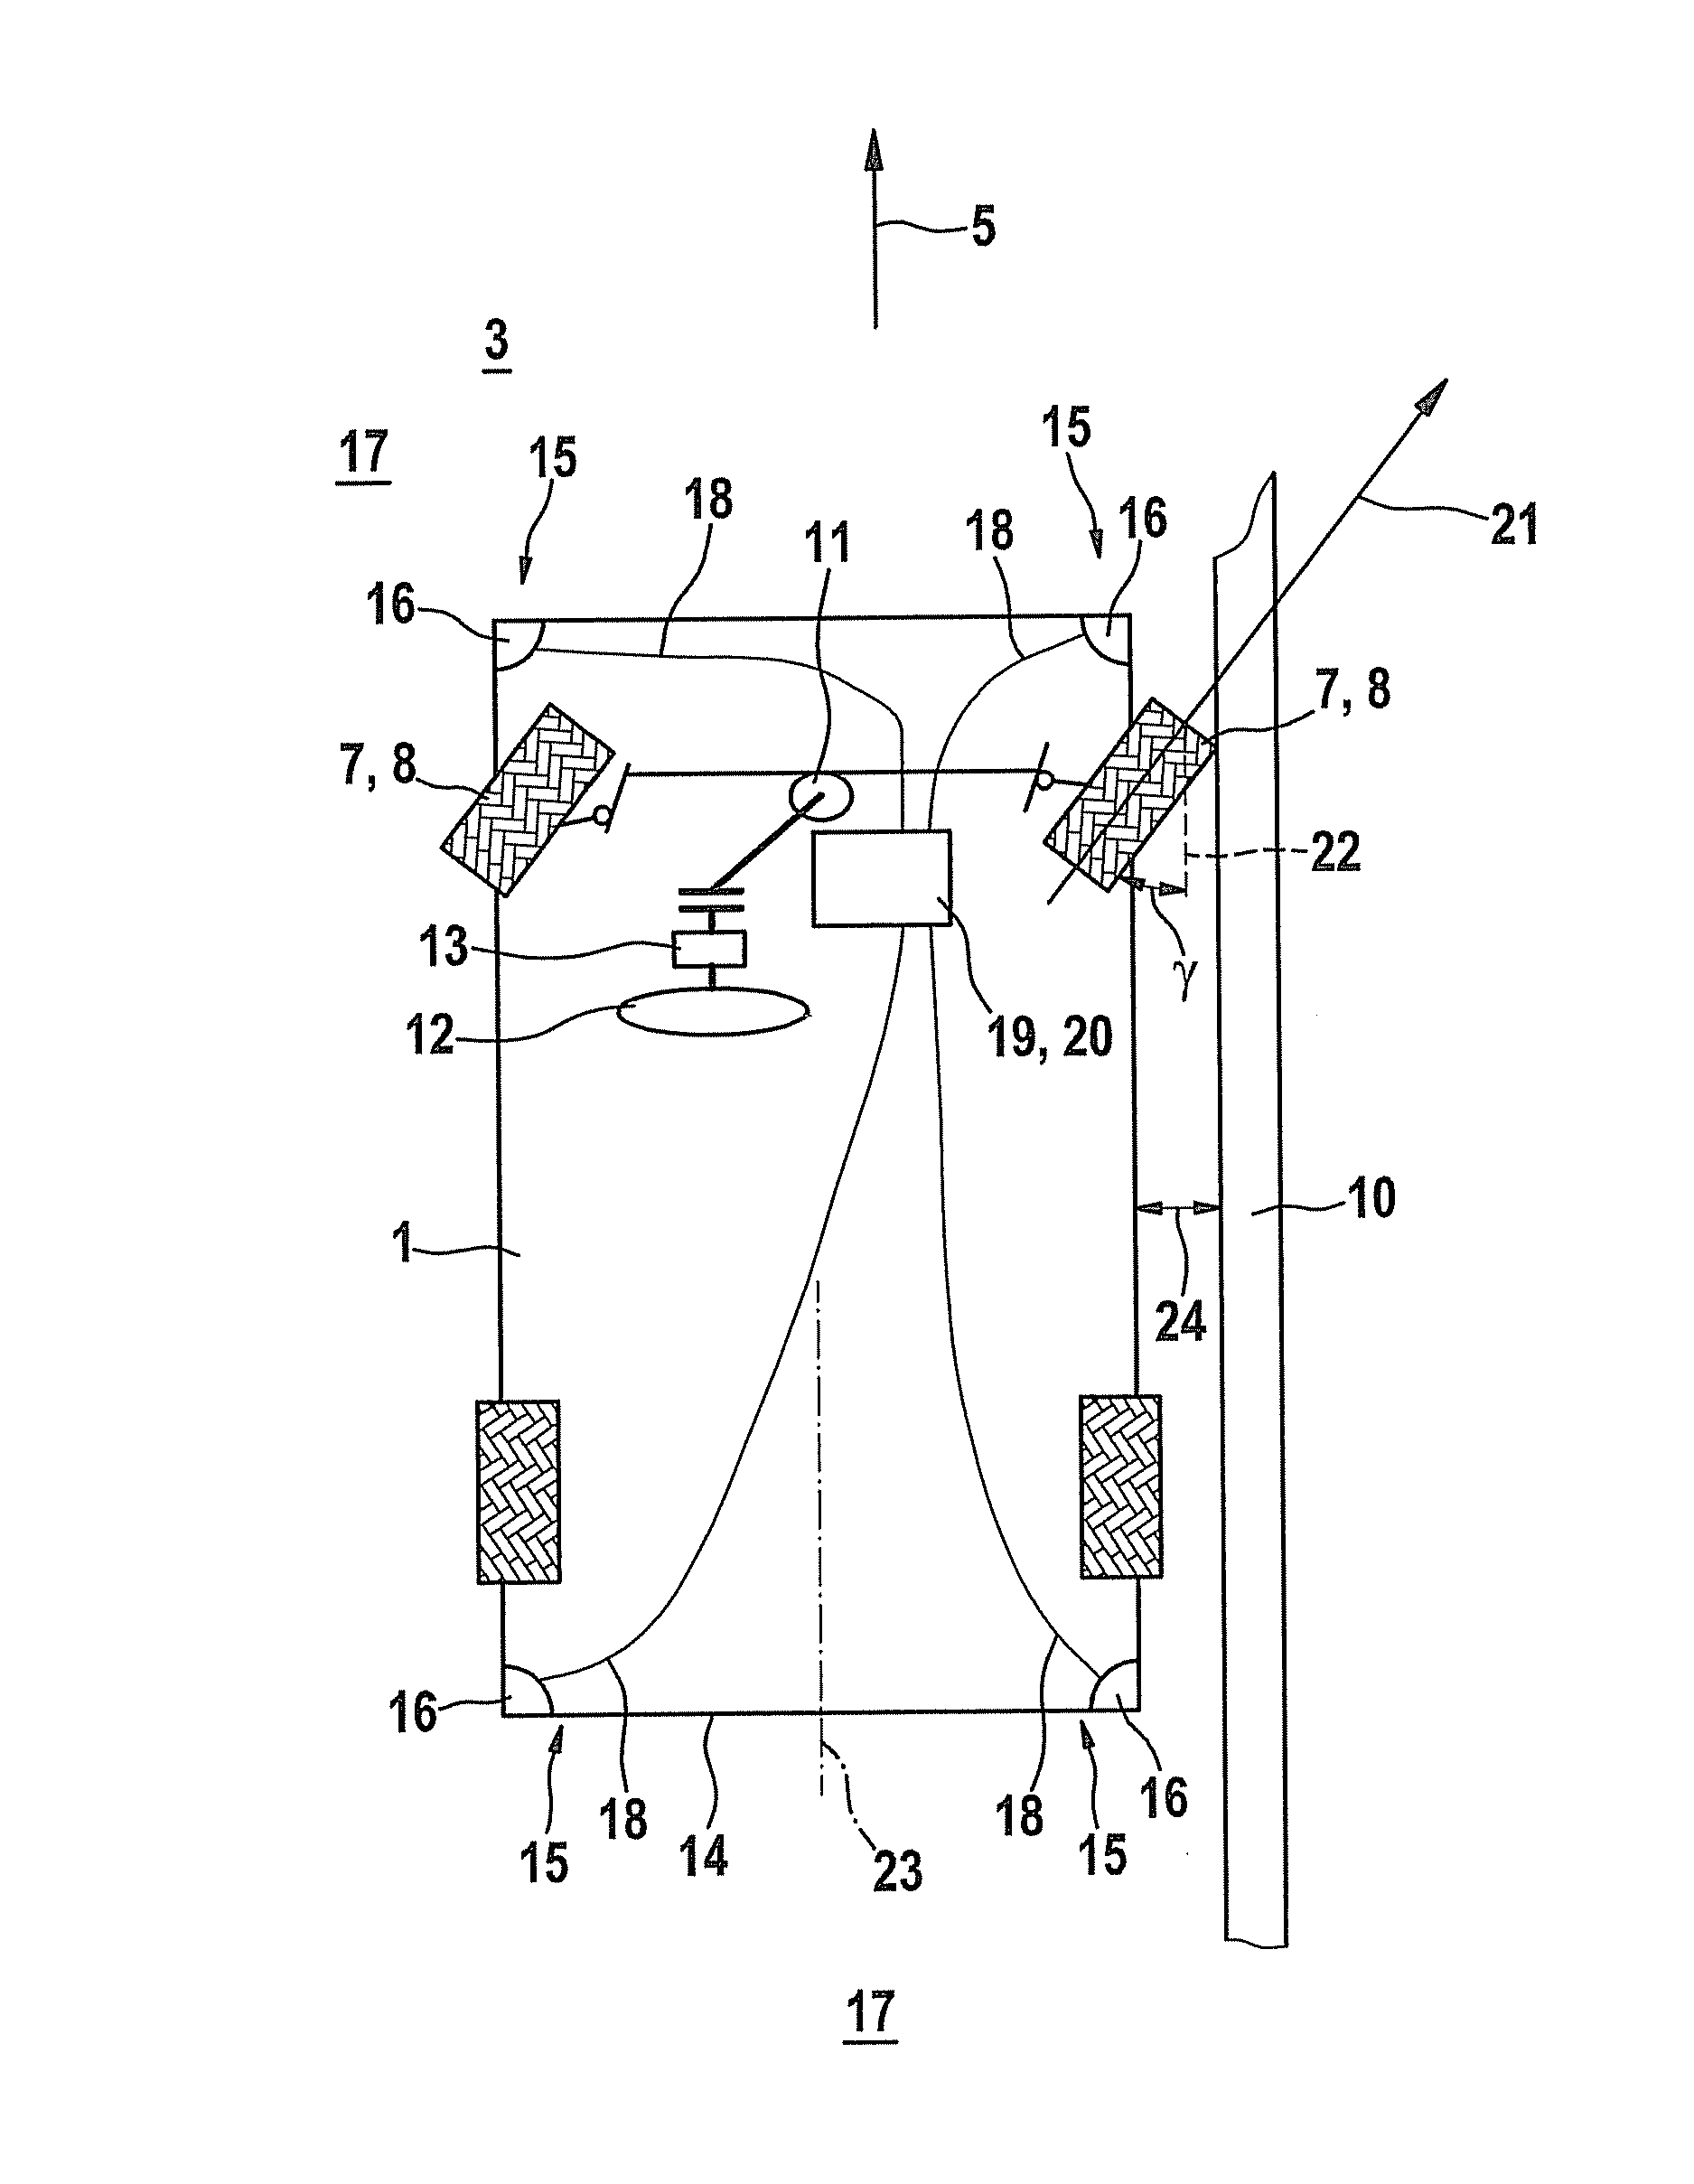 Method and device for parking a motor vehicle